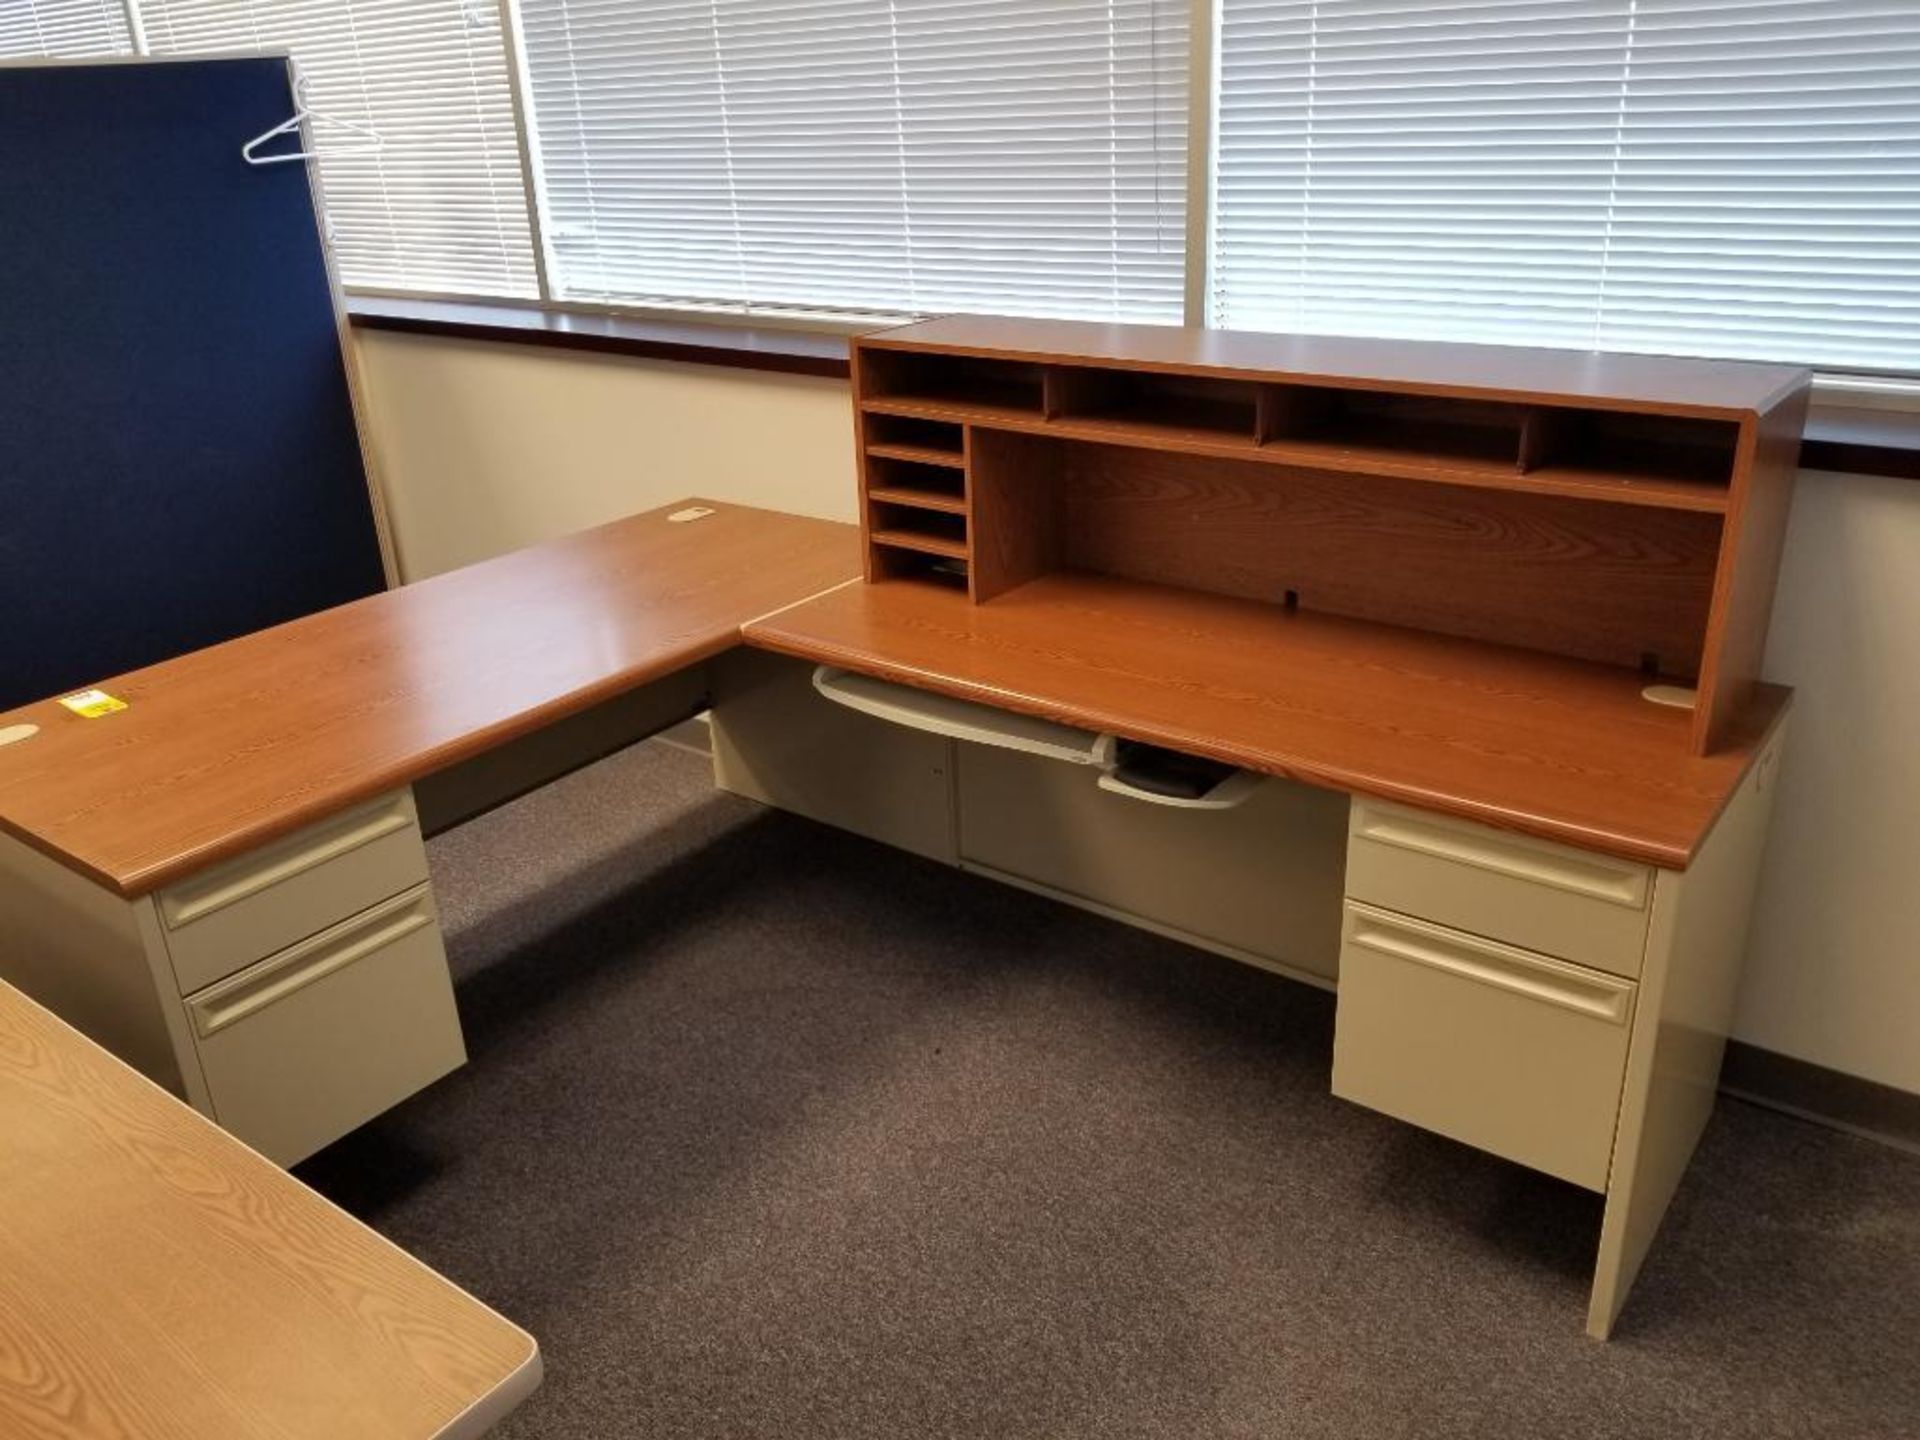 HON office furniture L-shaped desk. Overall size 66x90.